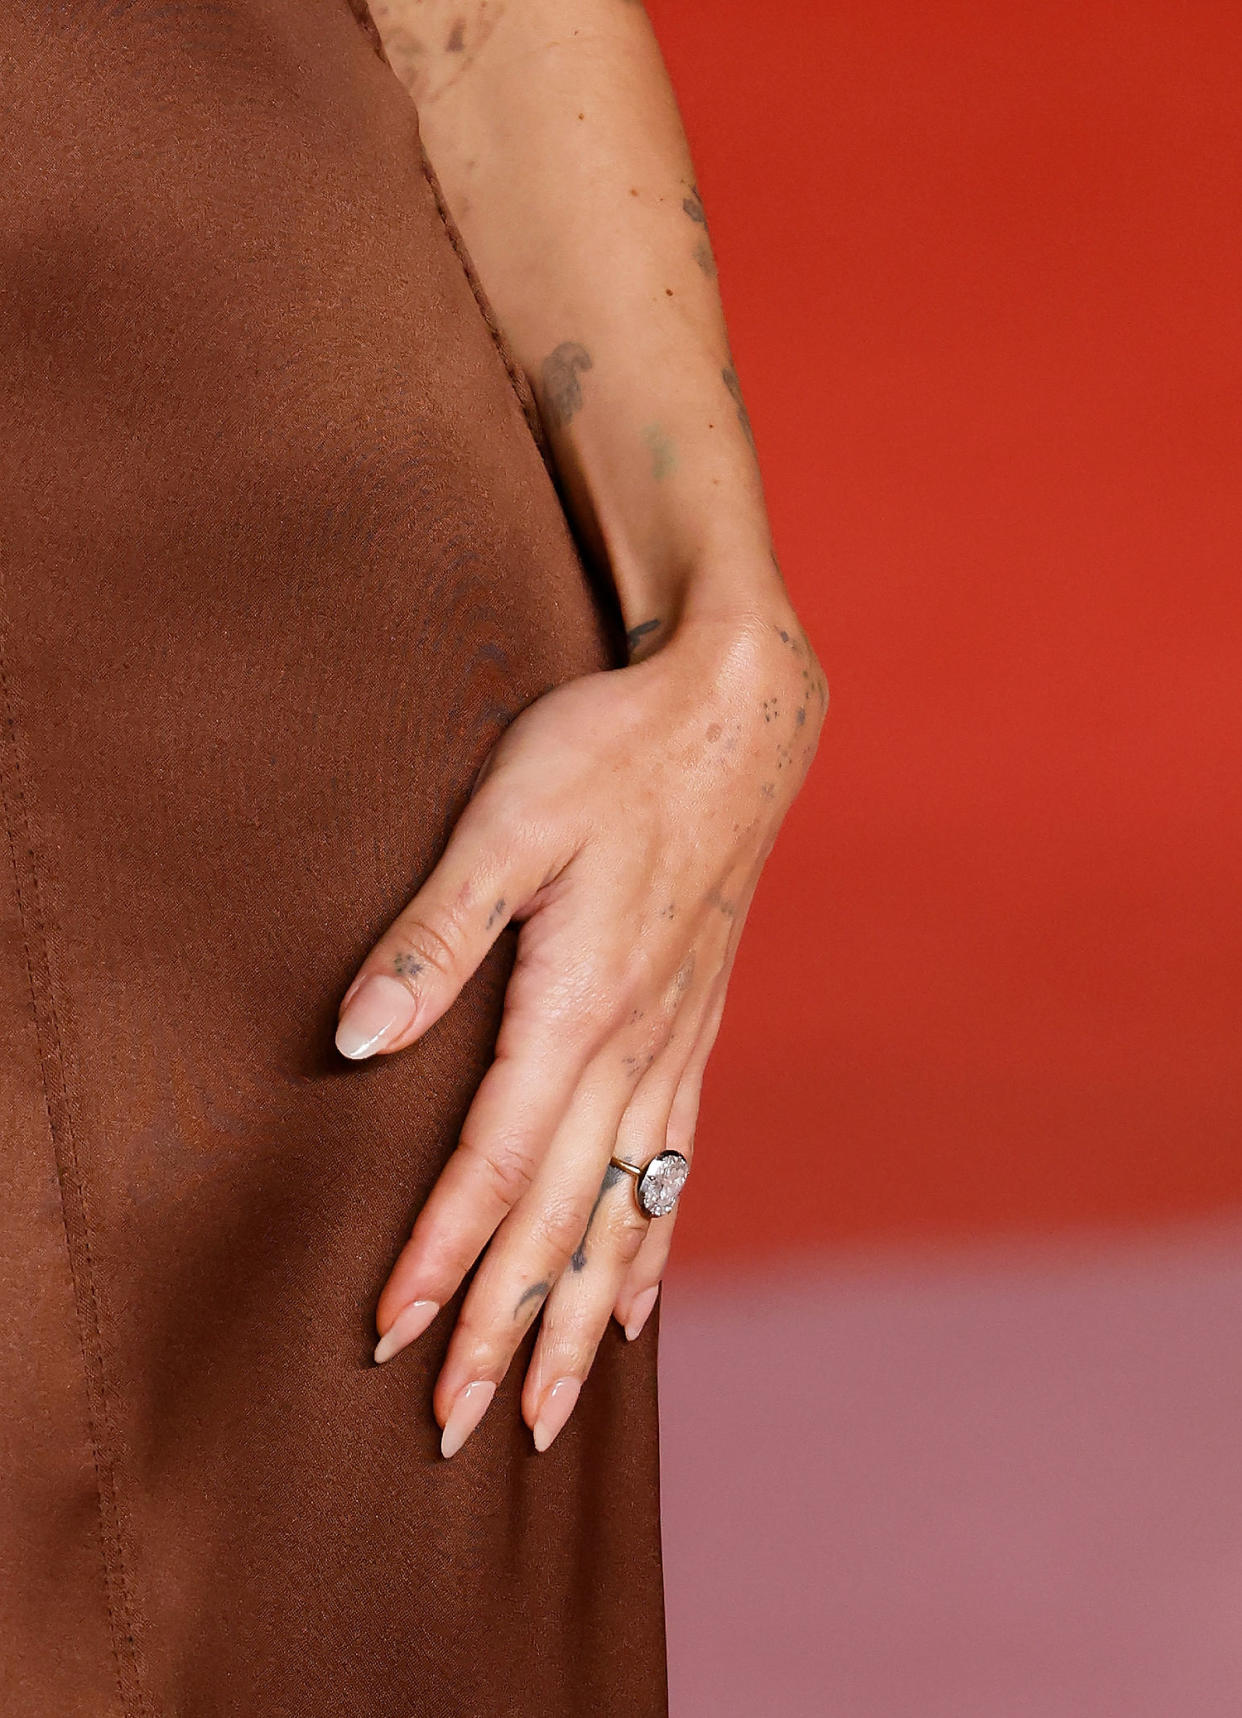 Zoe Kravitz ring on her finger (Taylor Hill / WireImage)